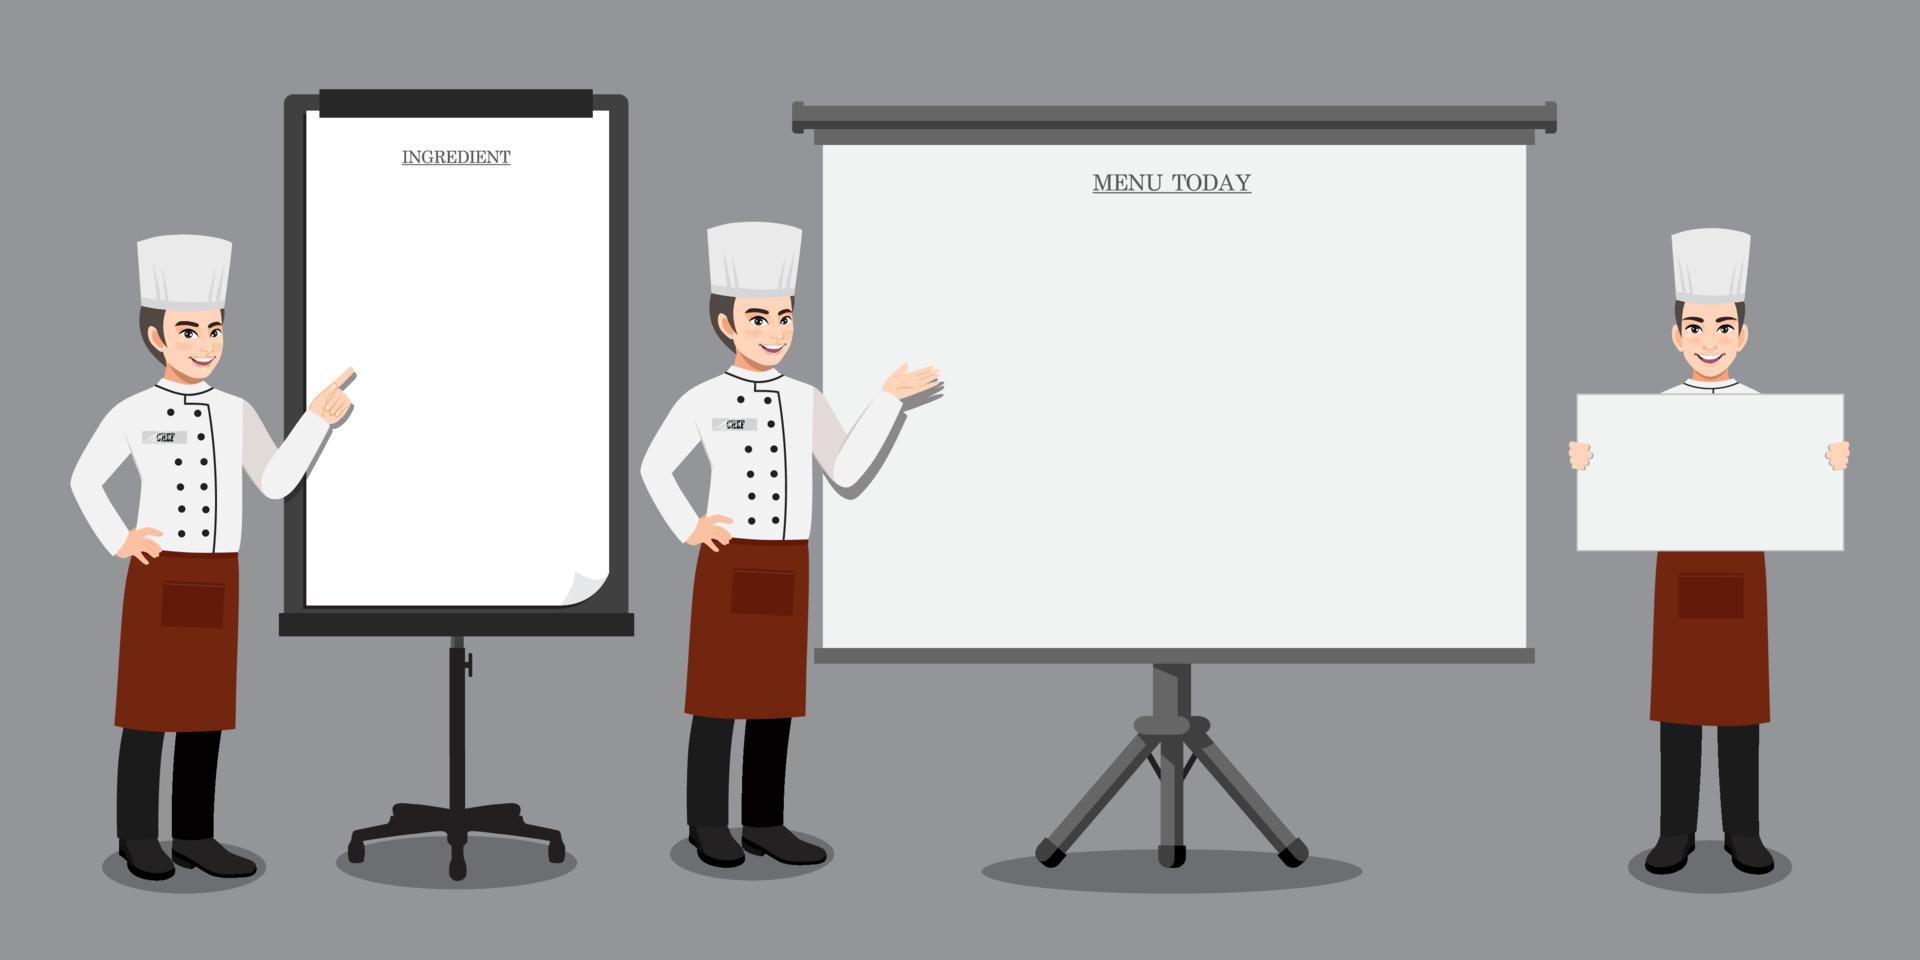 Professional Chef working character vector design, with different poses vector illustration cartoon character